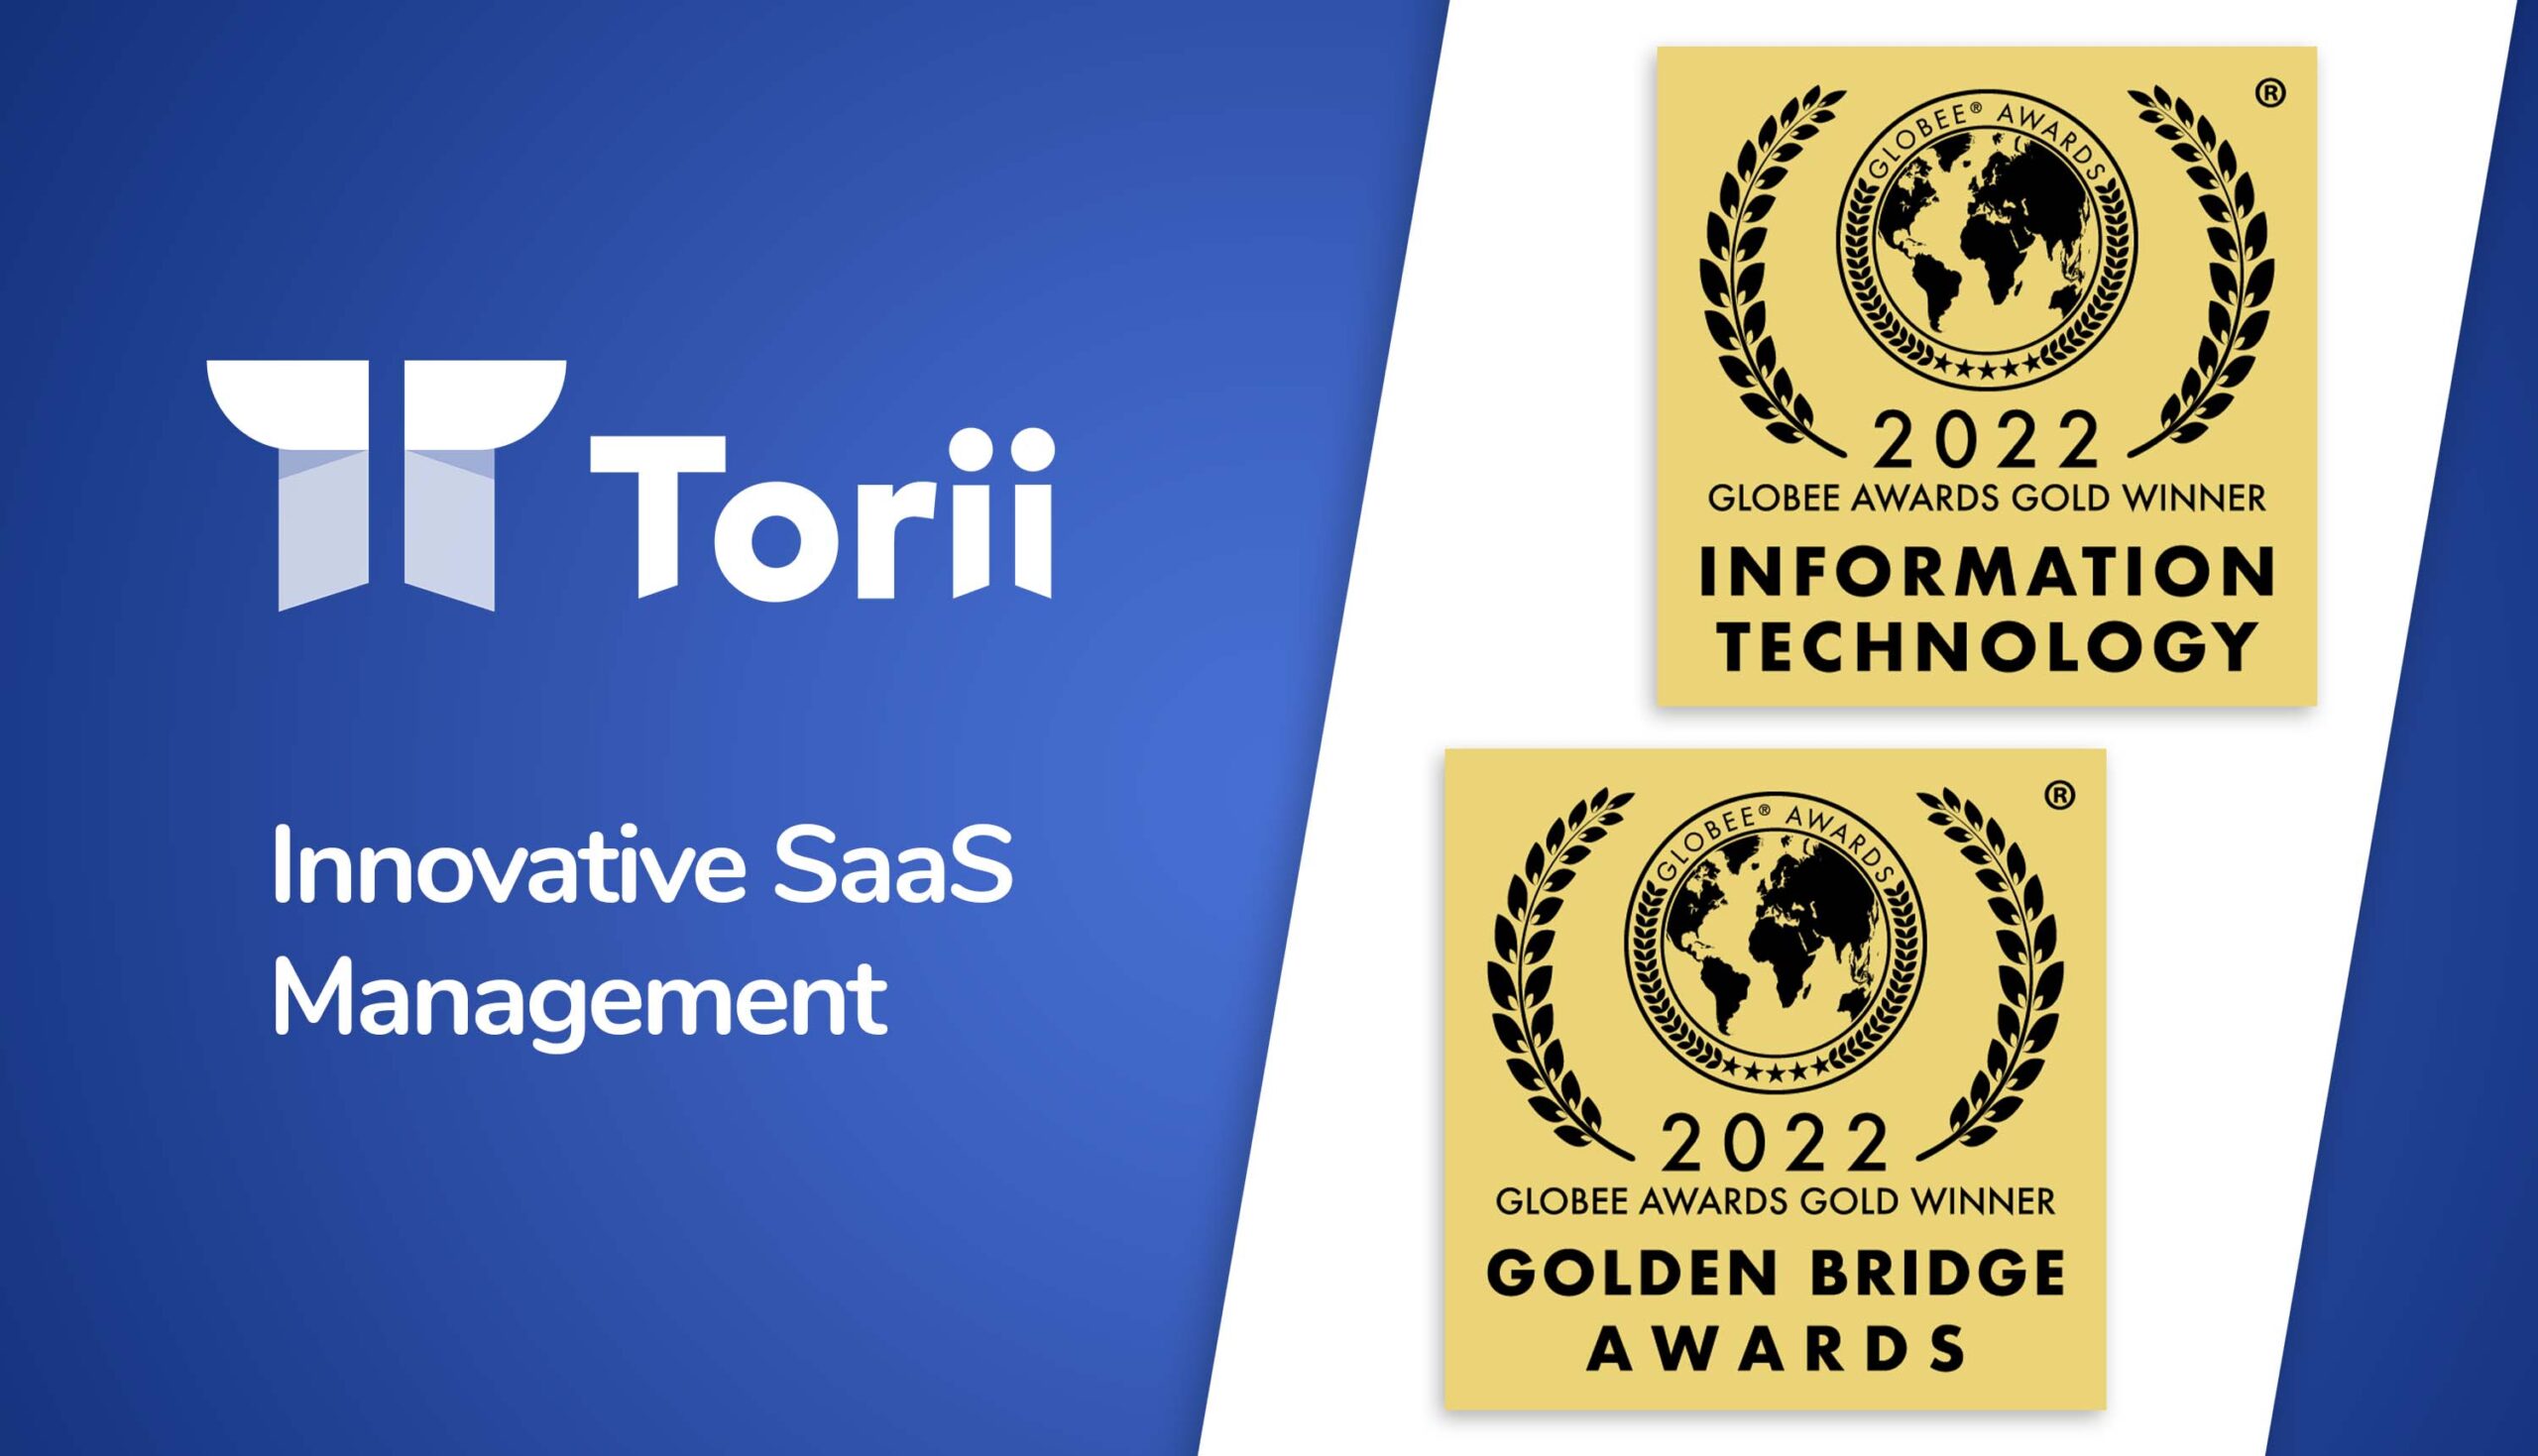 Torii Takes Gold for Innovative SaaS Management at both IT World and Golden Bridge Awards